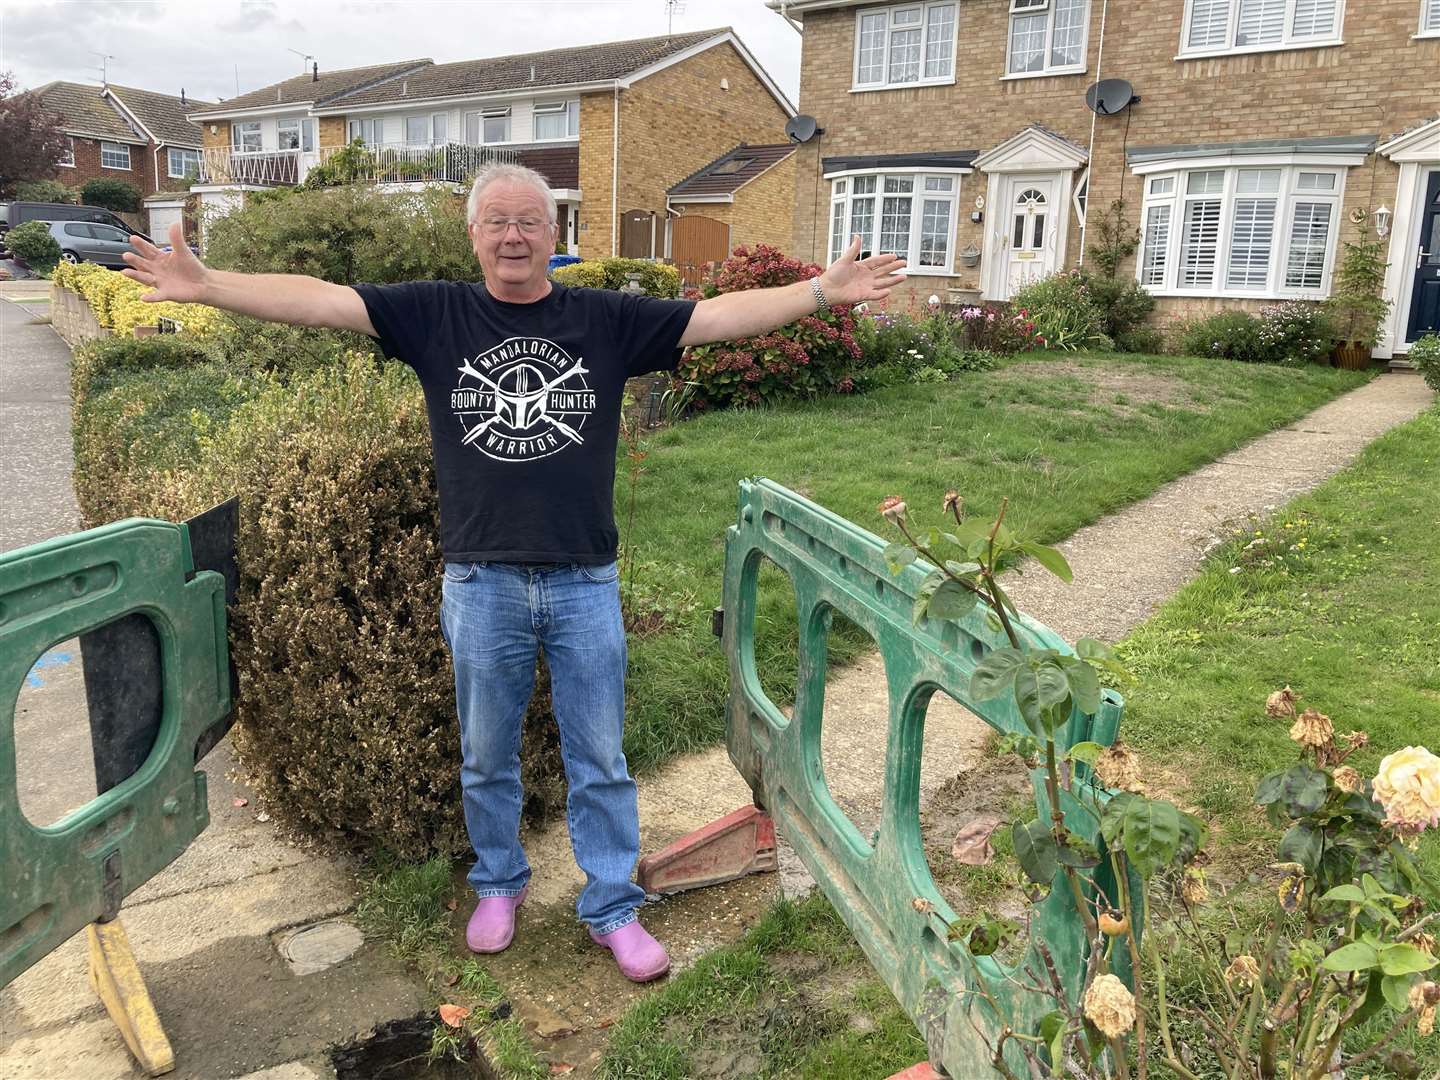 John MacGregor with the water leak outside his home in Clive Way, Sittingbourne